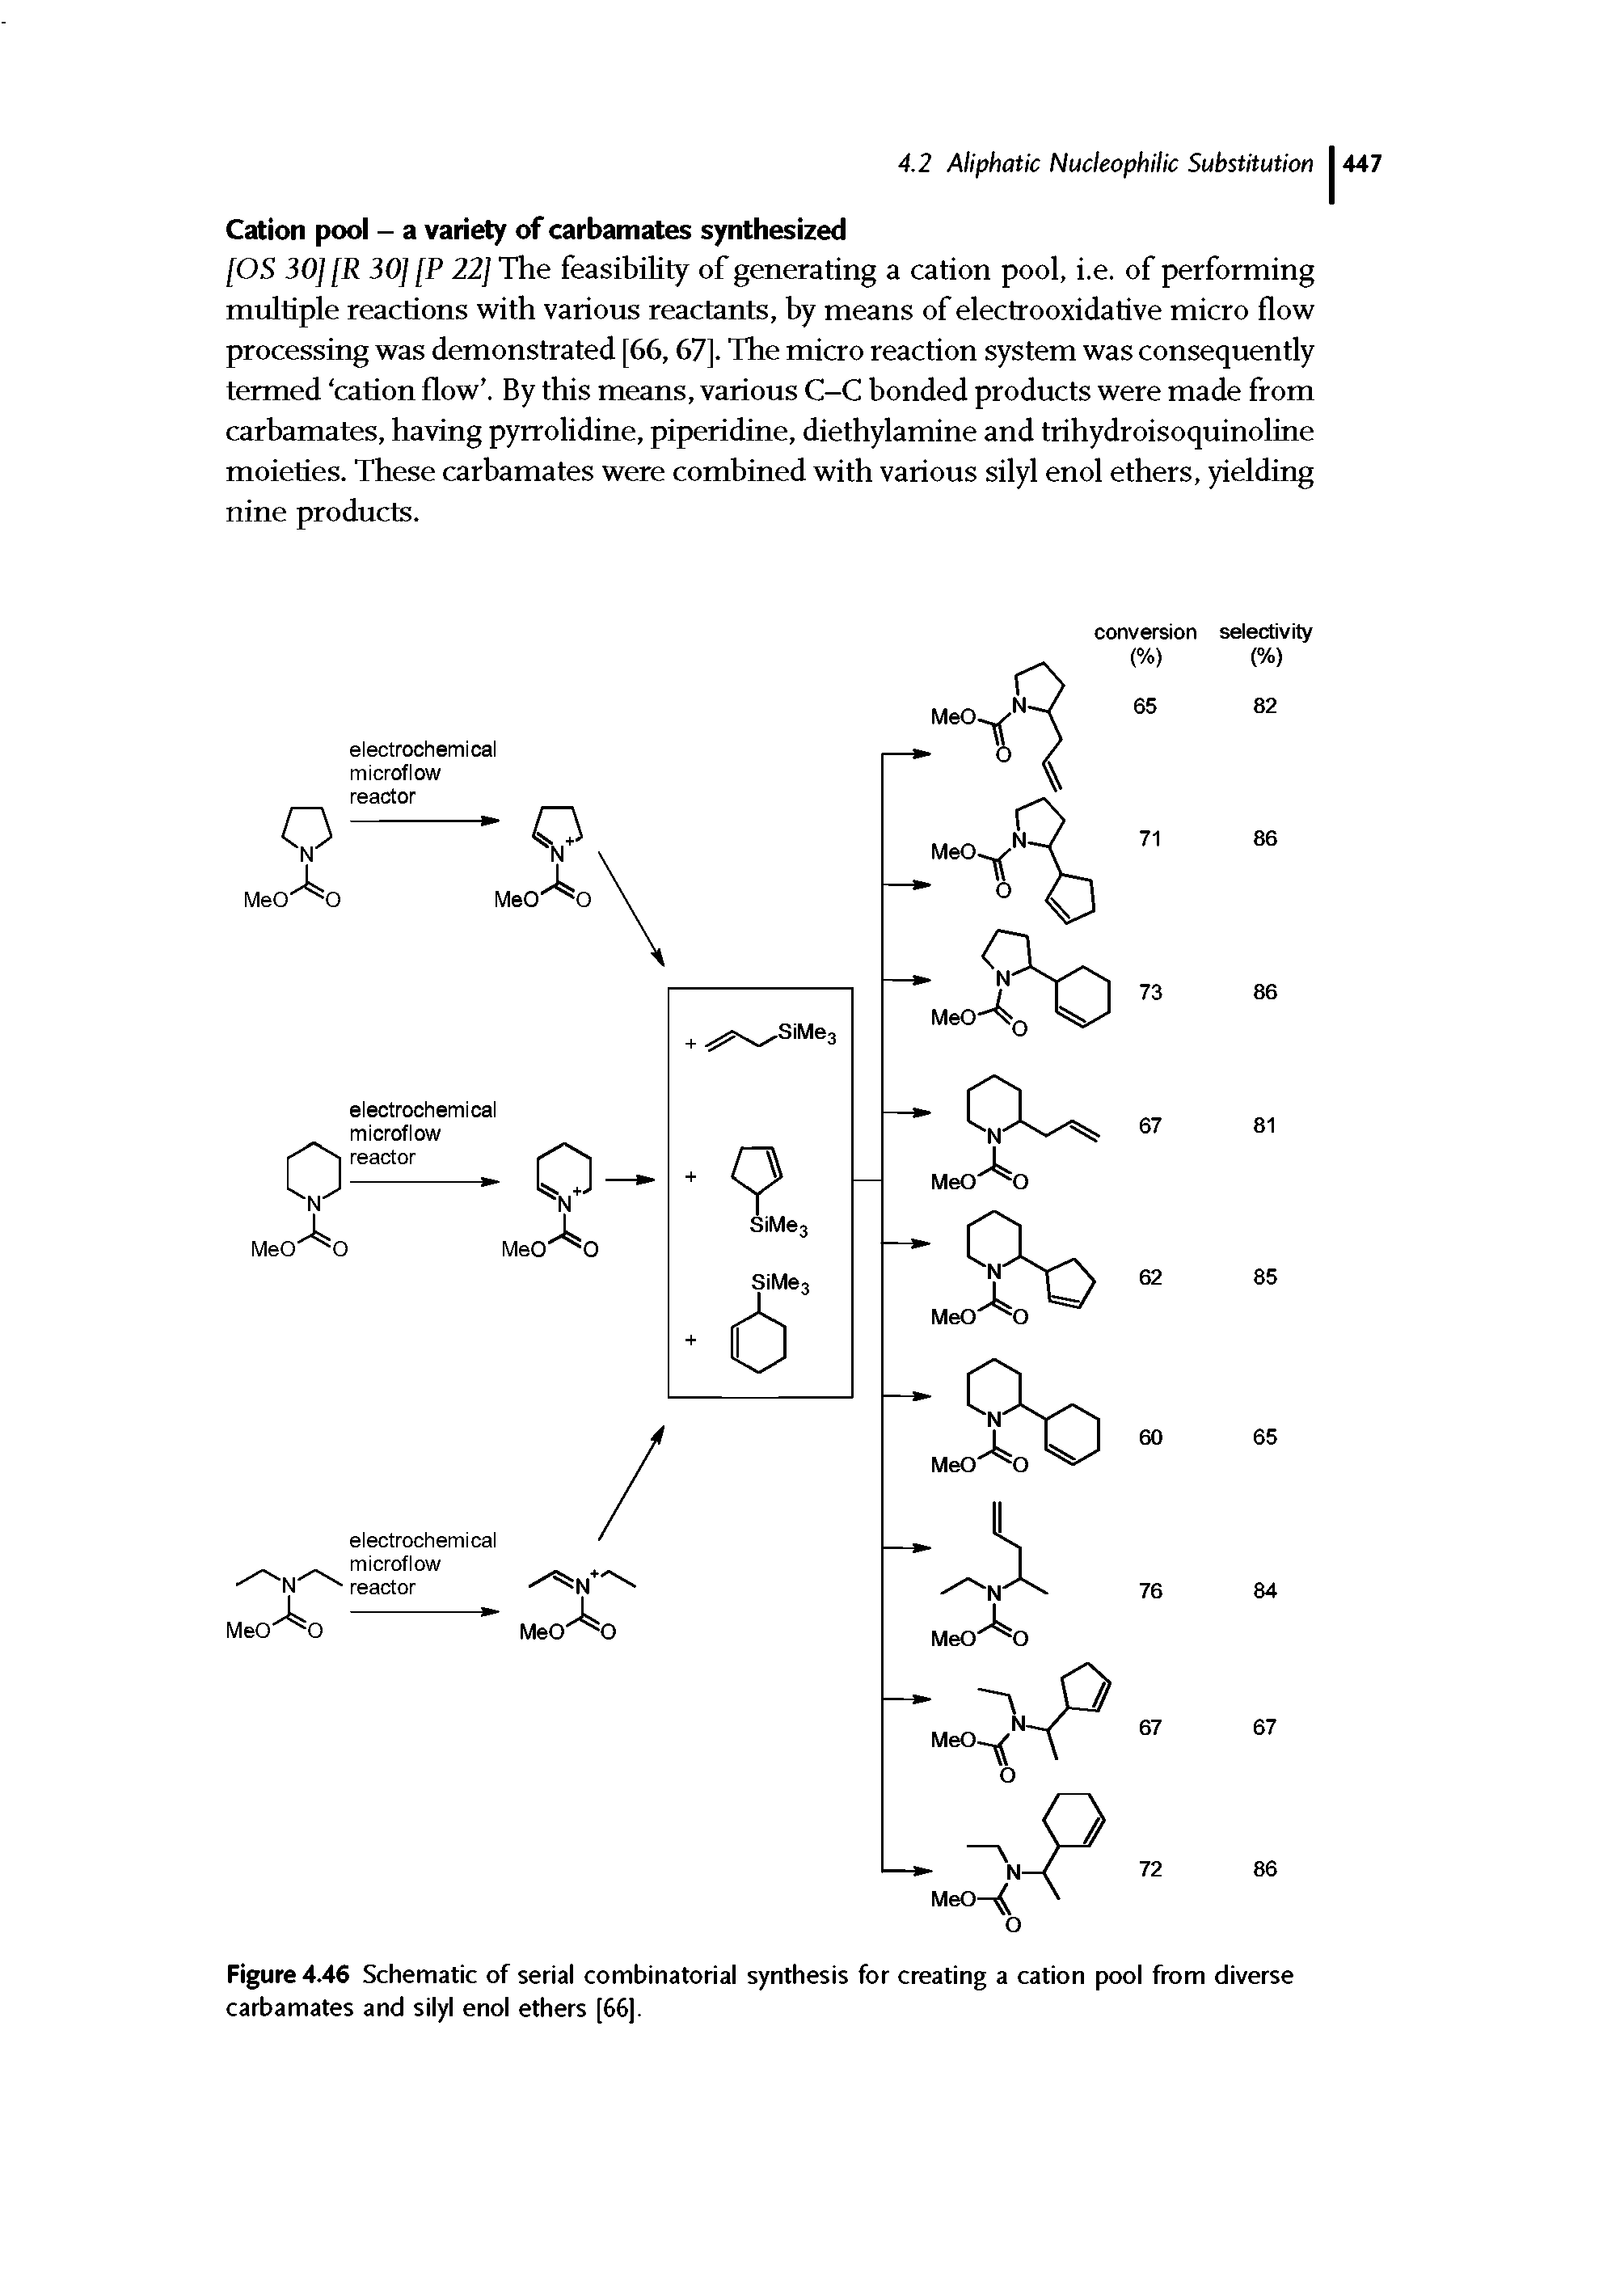 Figure 4.46 Schematic of serial combinatorial synthesis for creating a cation pool from diverse carbamates and silyl enol ethers [66. ...